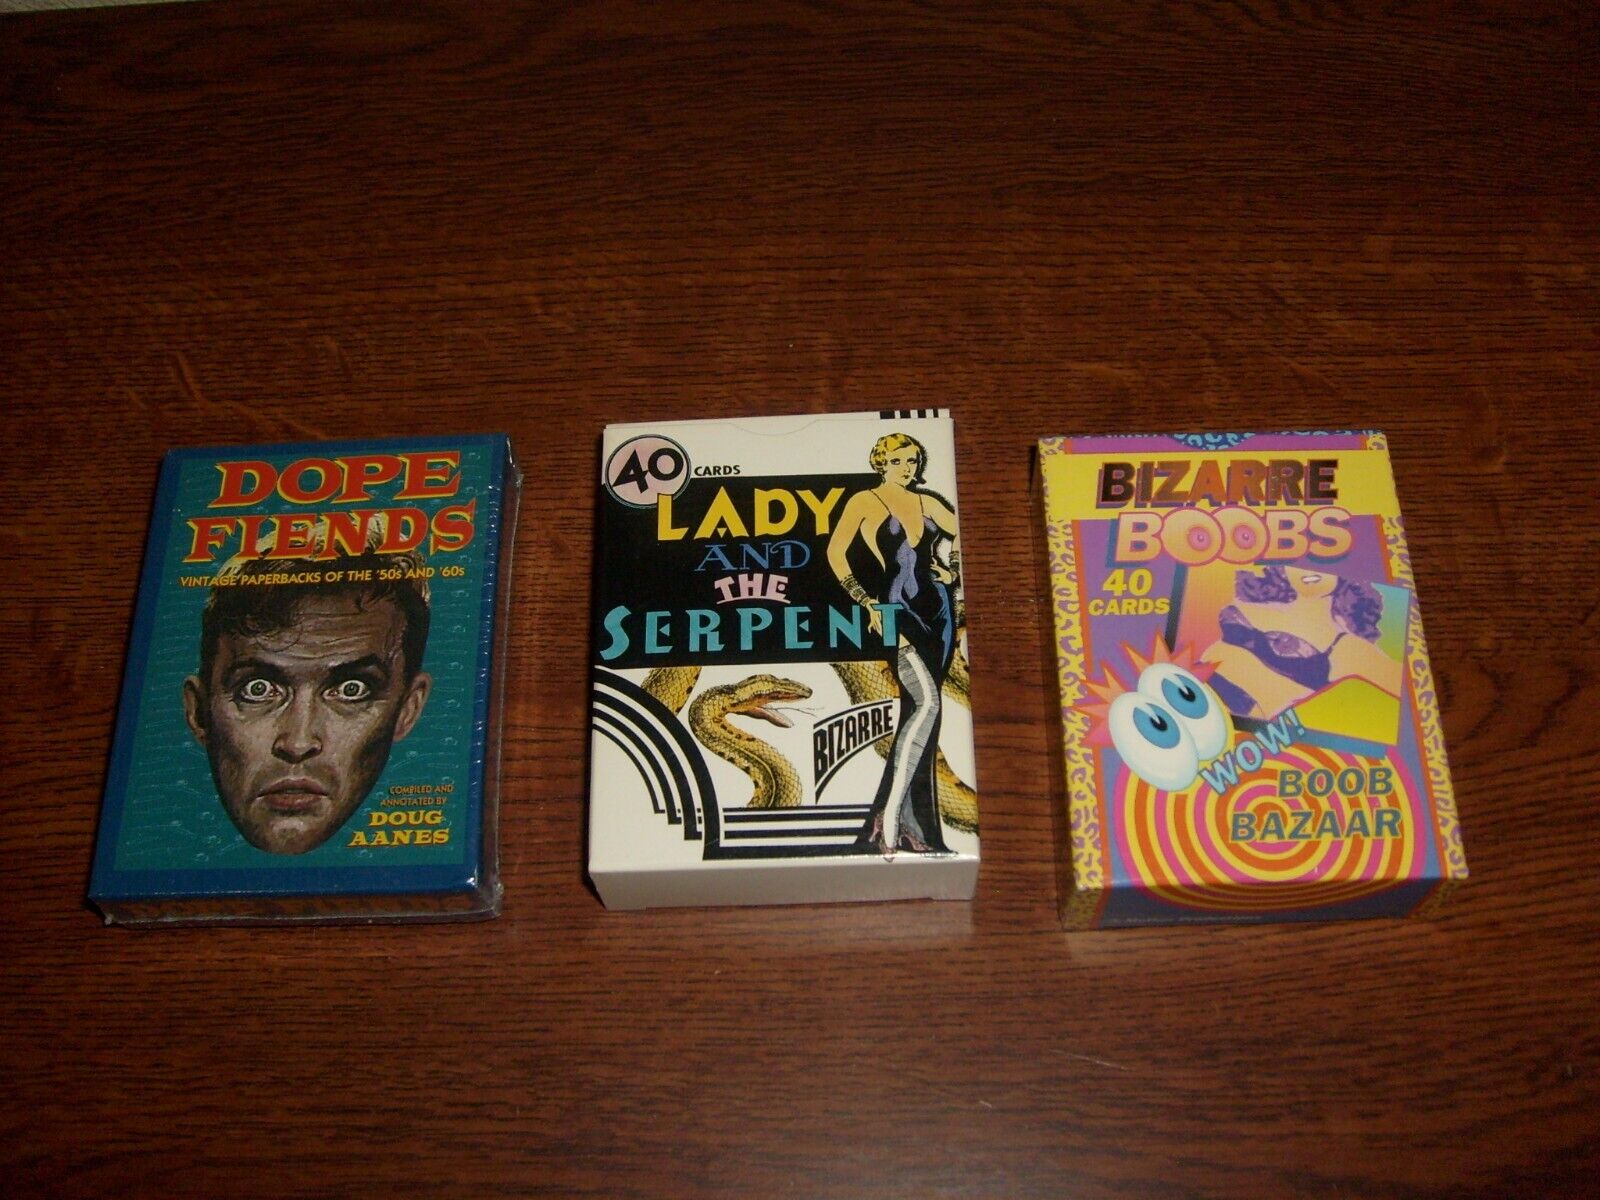 3 Trading Card Boxed sets: BIZARRE BOOBS, DOPE FIENDS, LADY AND THE SERPENT